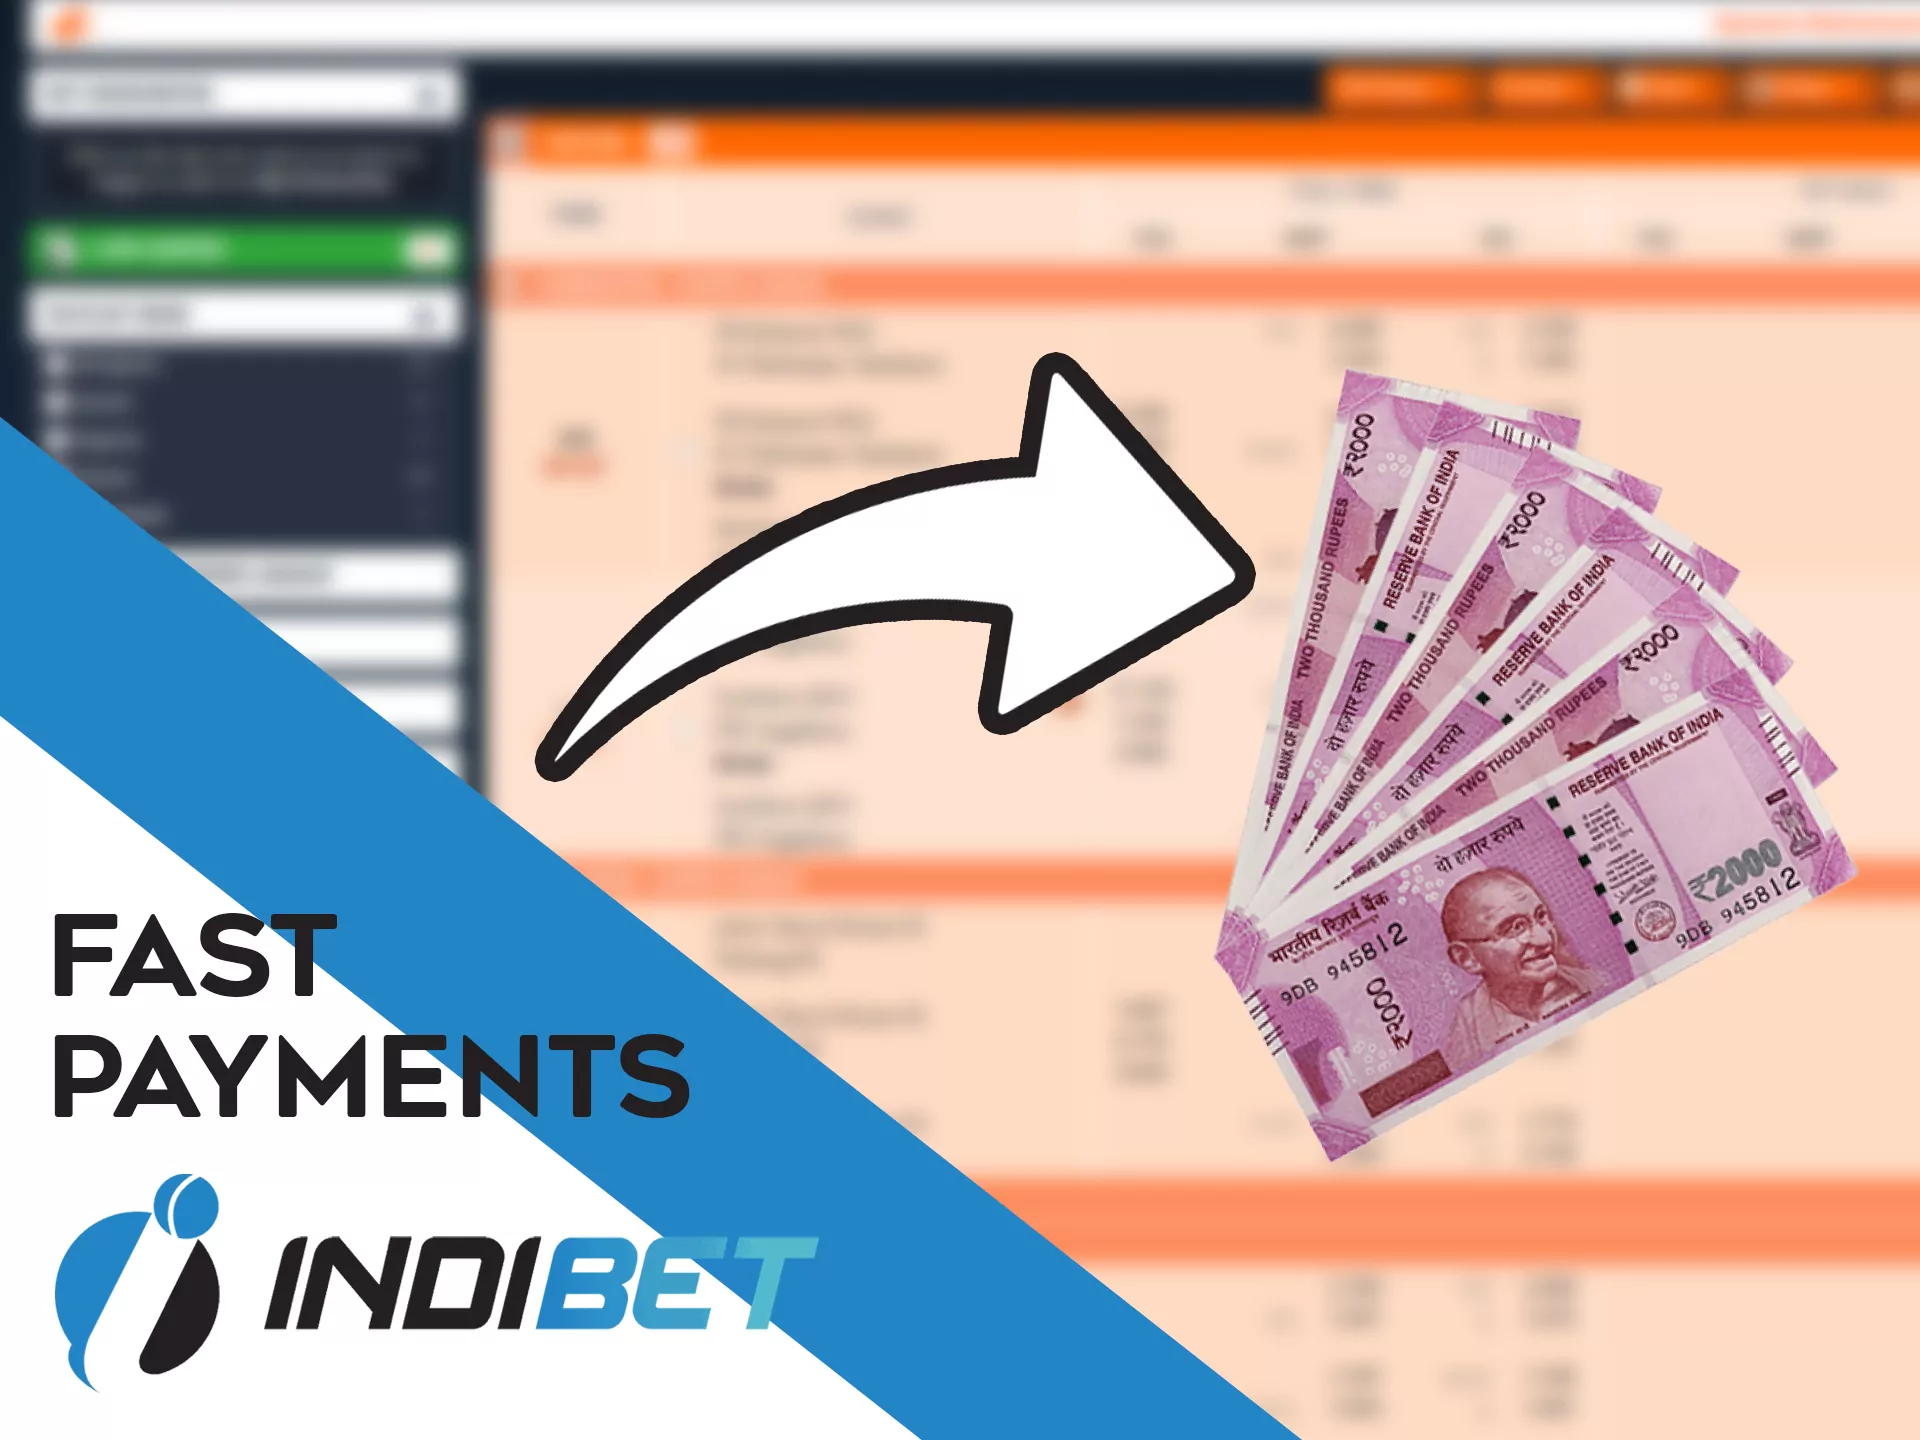 Make instant deposit and withdrawals at Indibet.